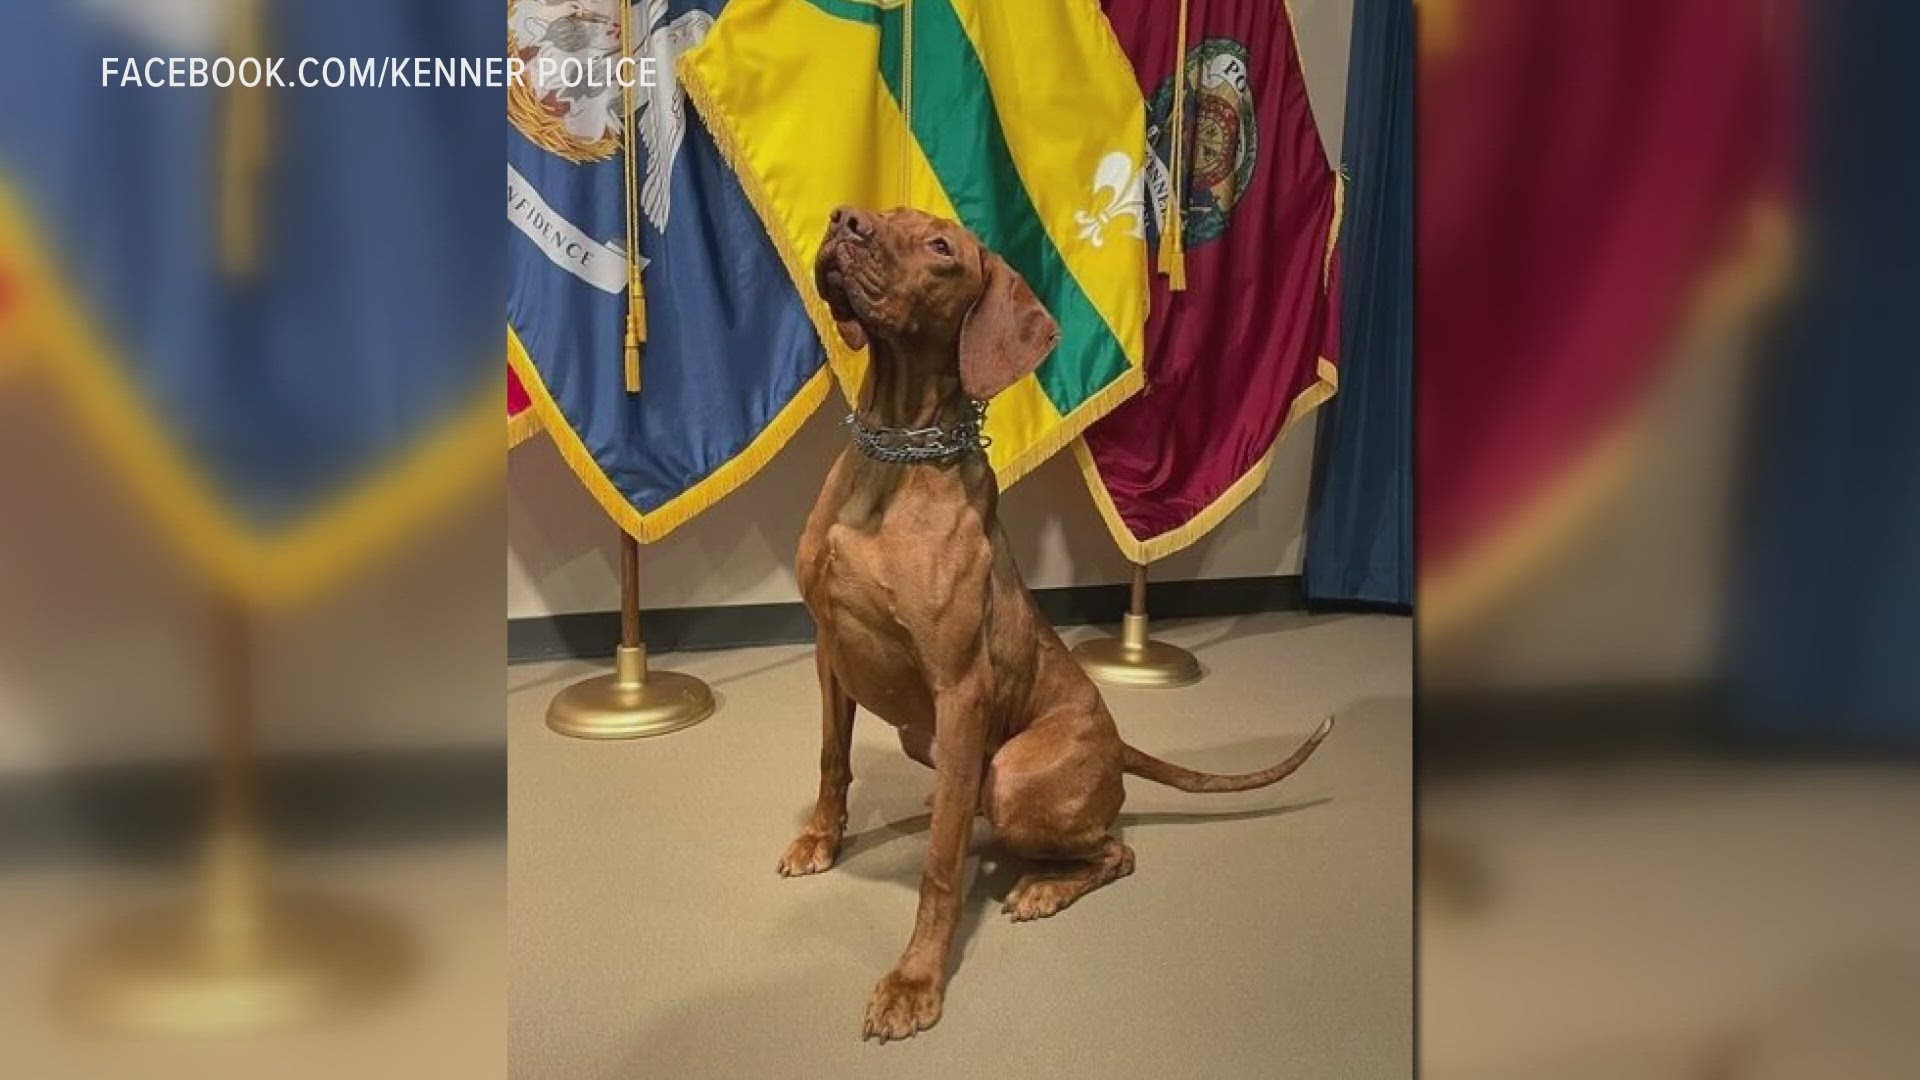 Kenner PD adds a new K9 officer to their department.